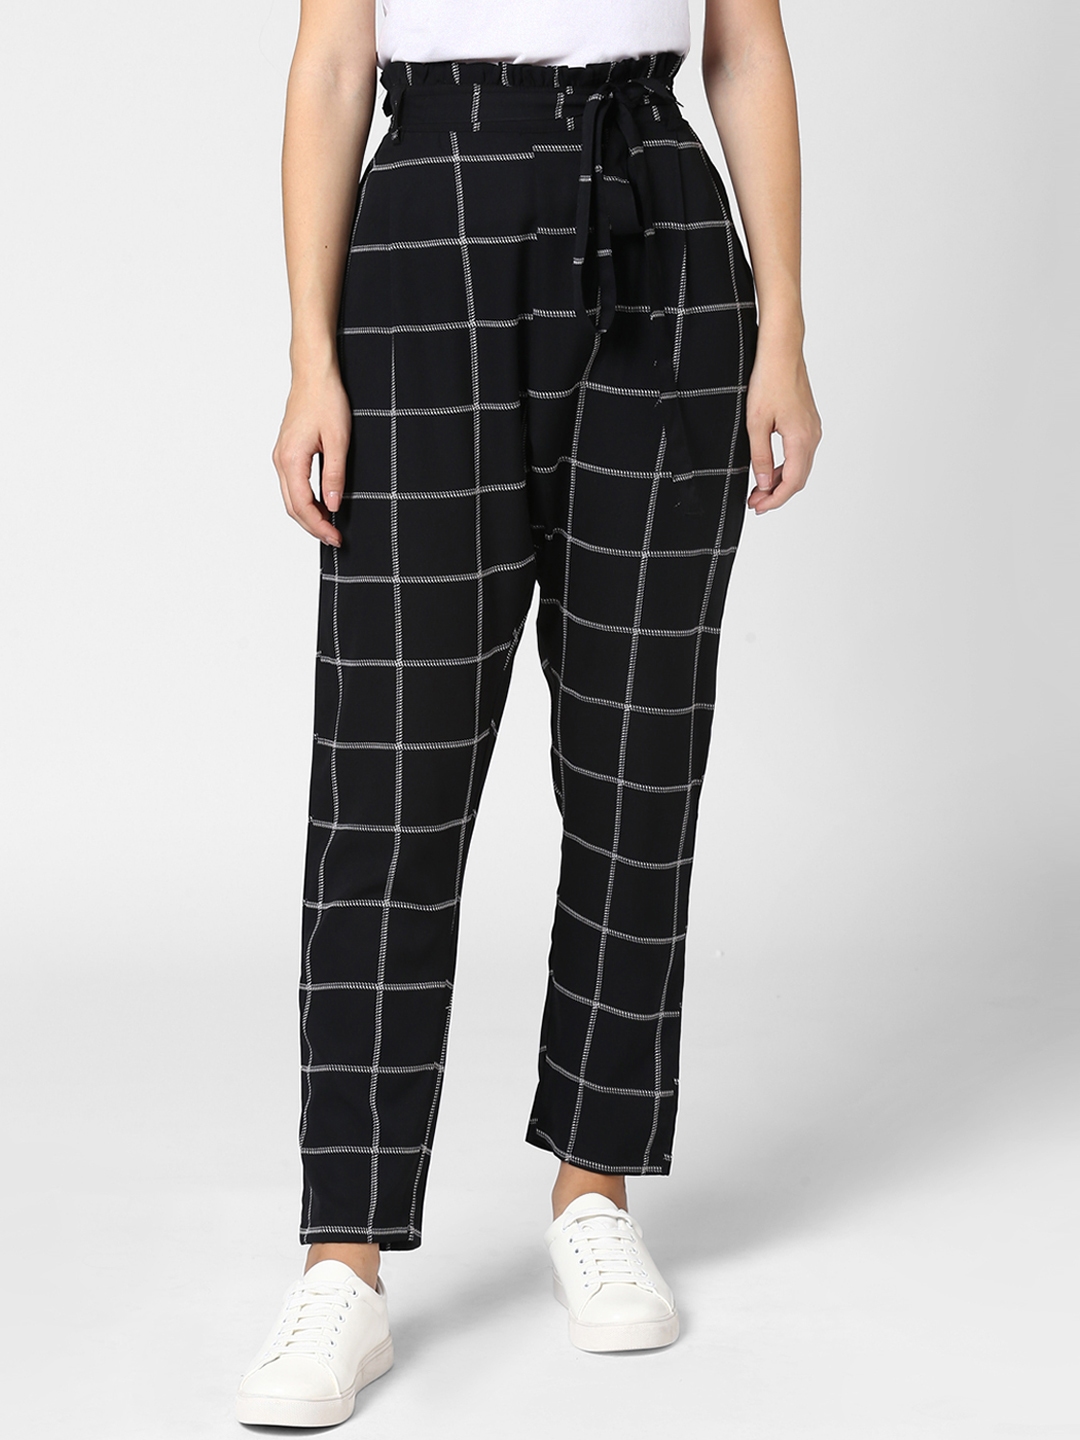 Buy StyleStone Women Black  White Tapered Fit Checked Peg Trousers   Trousers for Women 8158979  Myntra